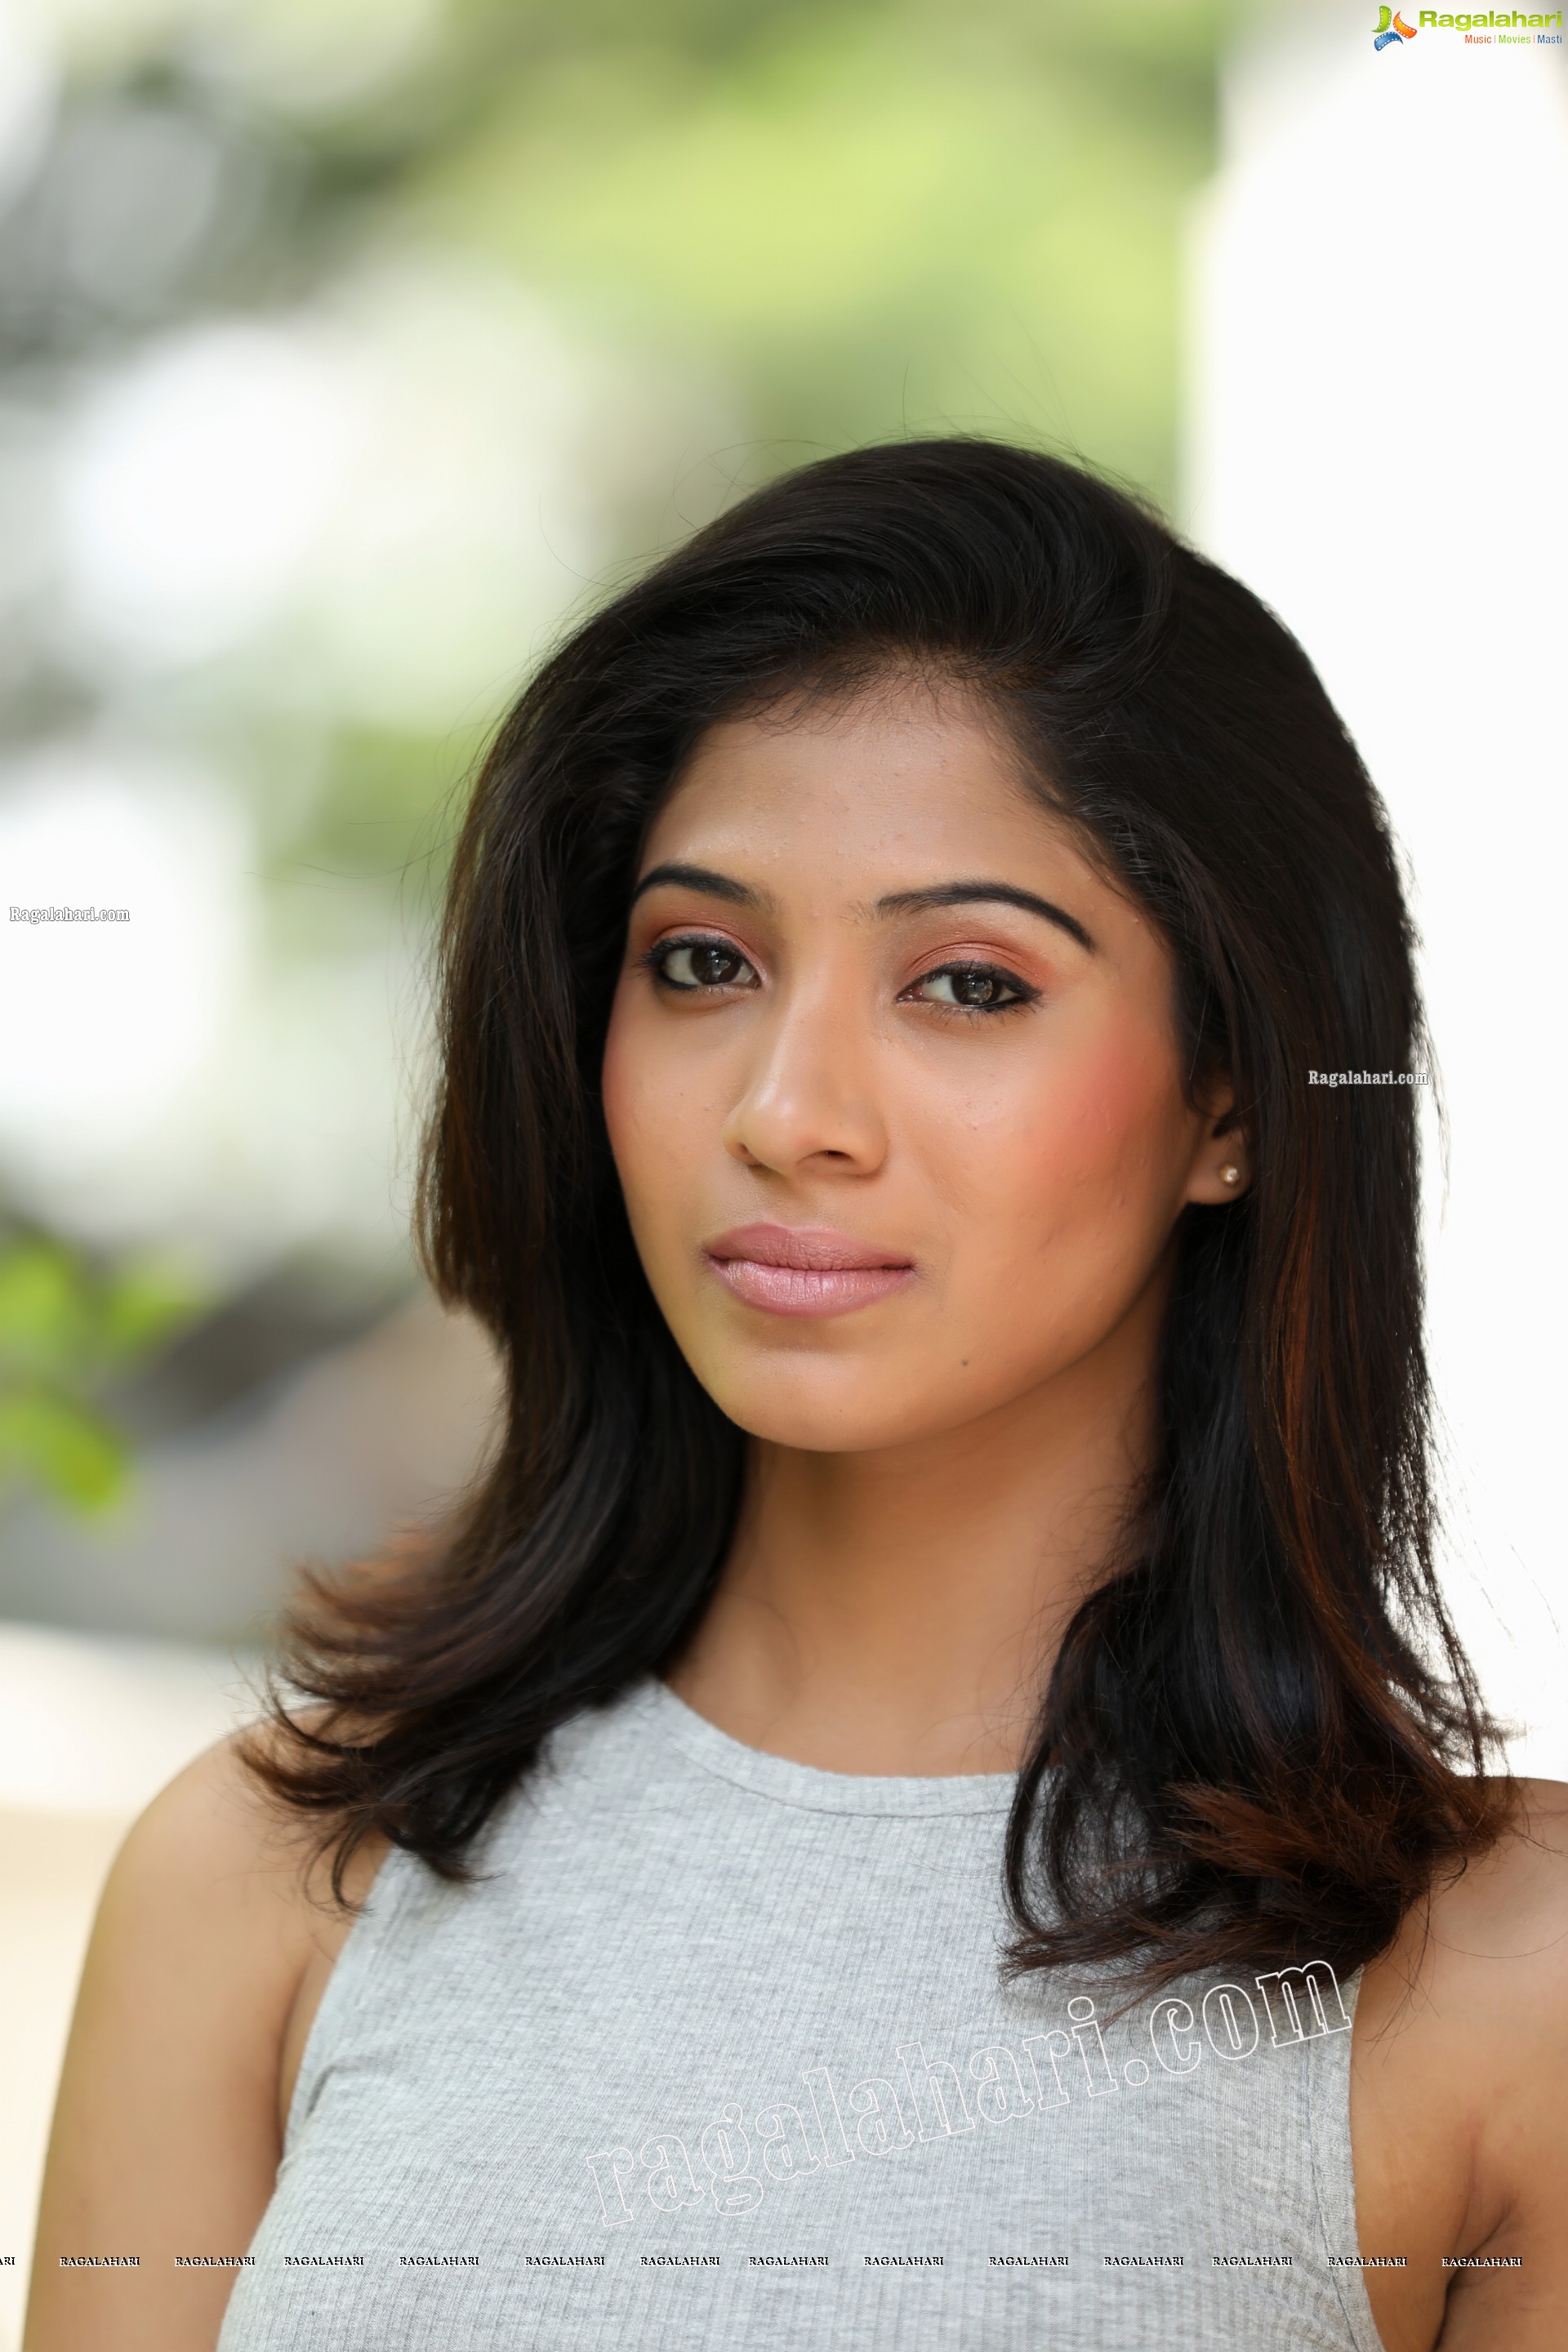 Swetha Mathi in Gray Cropped Tank Top and Maroon Pant Exclusive Photo Shoot